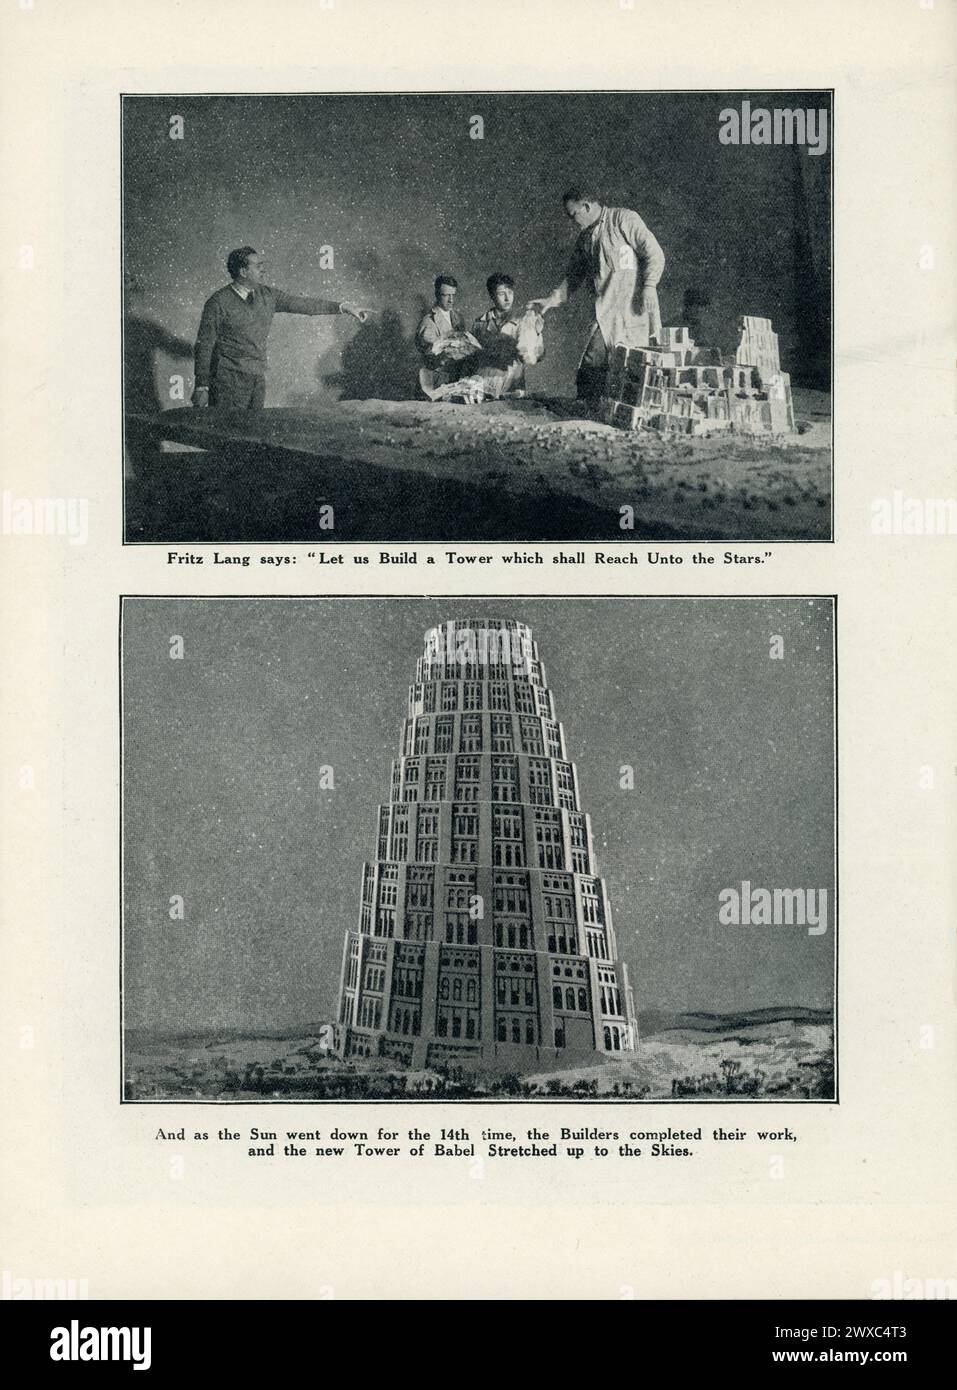 Director FRITZ LANG with Set Builders during construction of the TOWER OF BABEL model on page from original release British programme for METROPOLIS 1927 director FRITZ LANG novel and screenplay Thea von Harbou Universum Film (UFA) Stock Photo